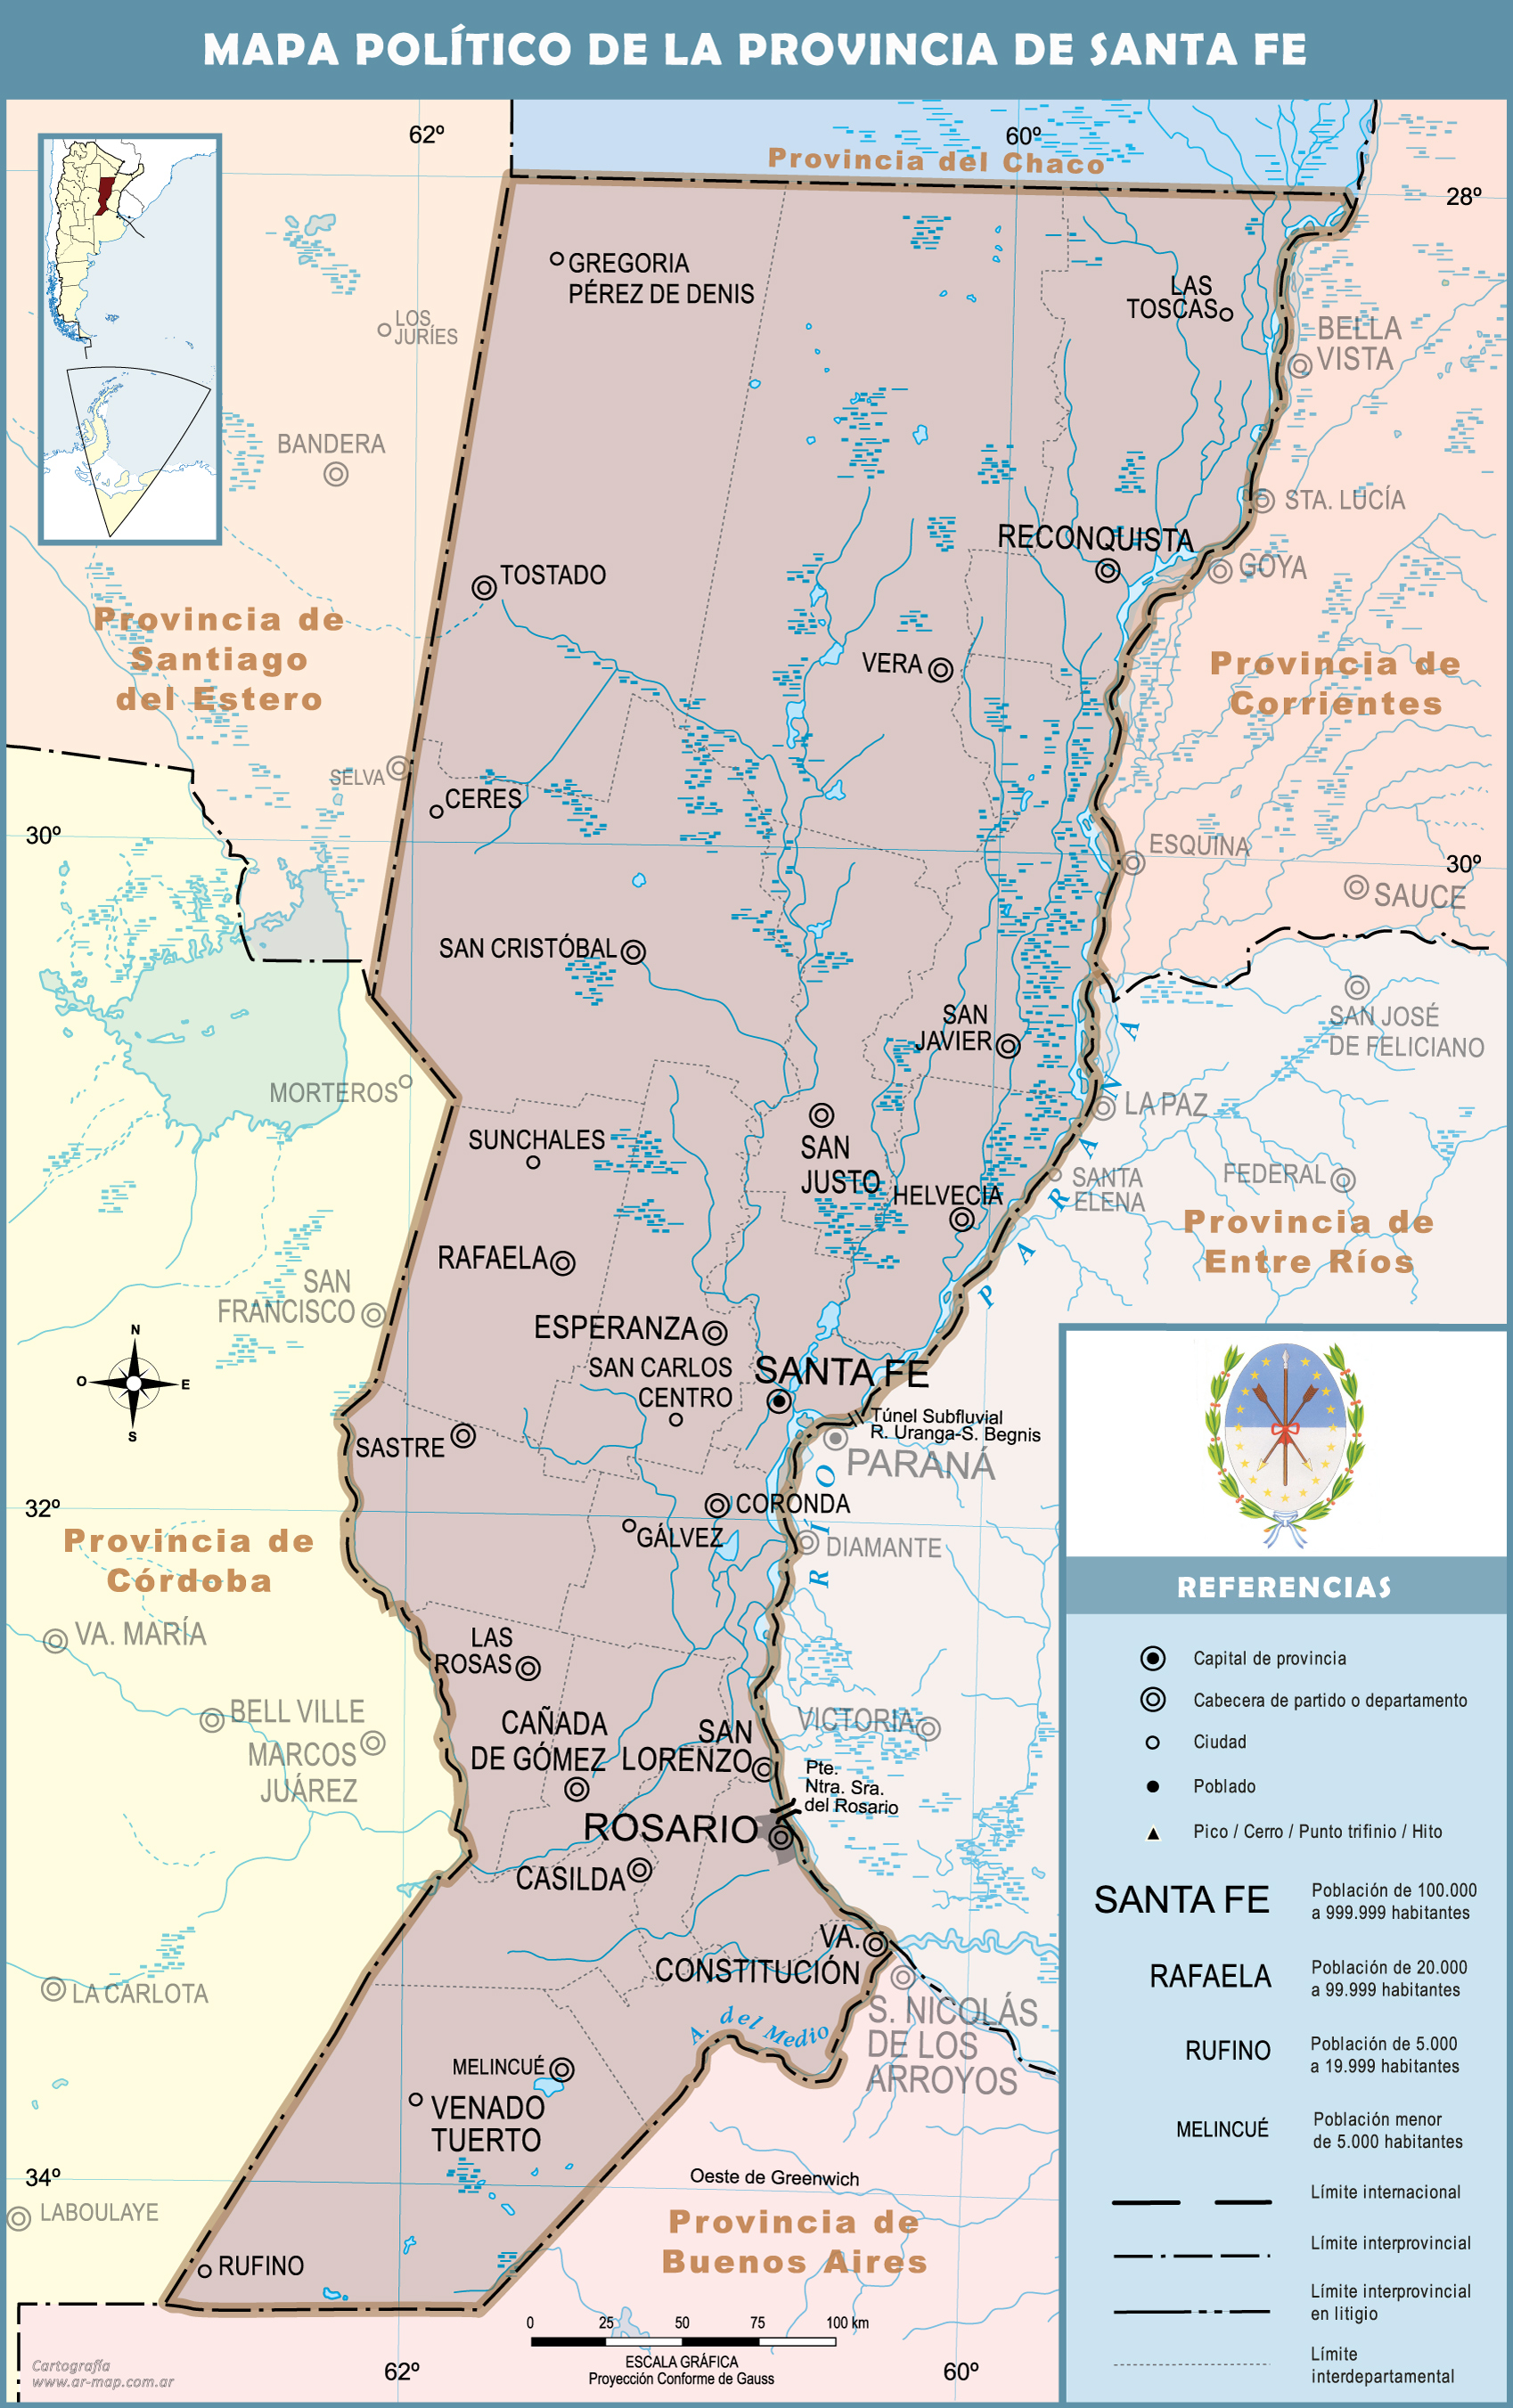 Political map of the Province of Santa Fe, Argentina | Gifex